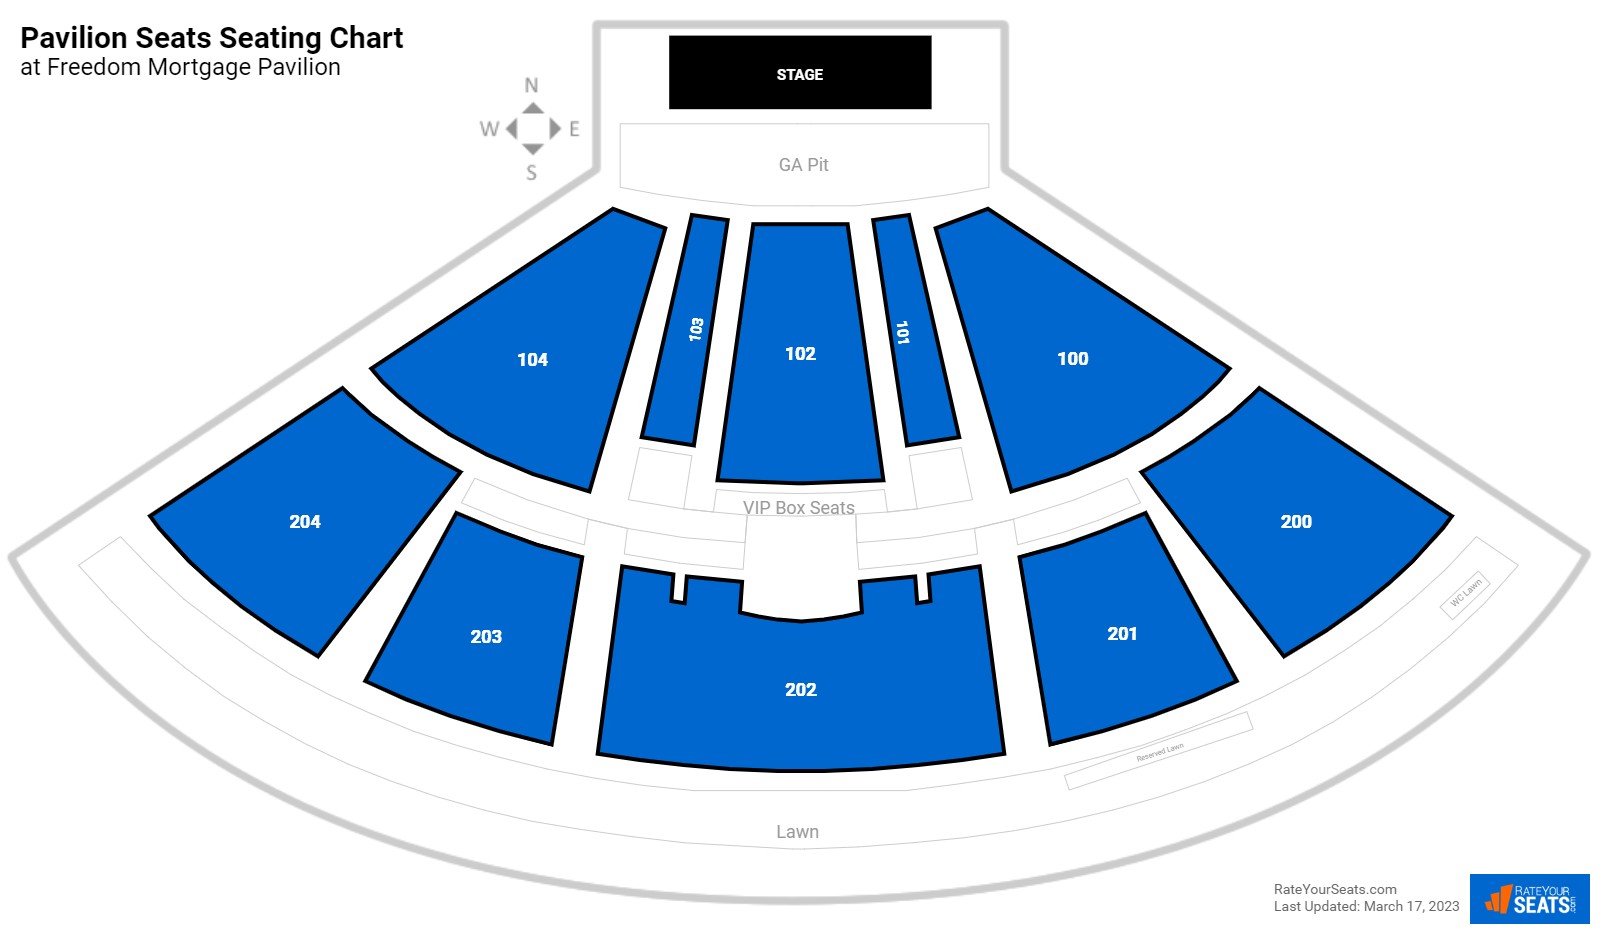 Concert Pavilion Seats Seating Chart at Freedom Mortgage Pavilion